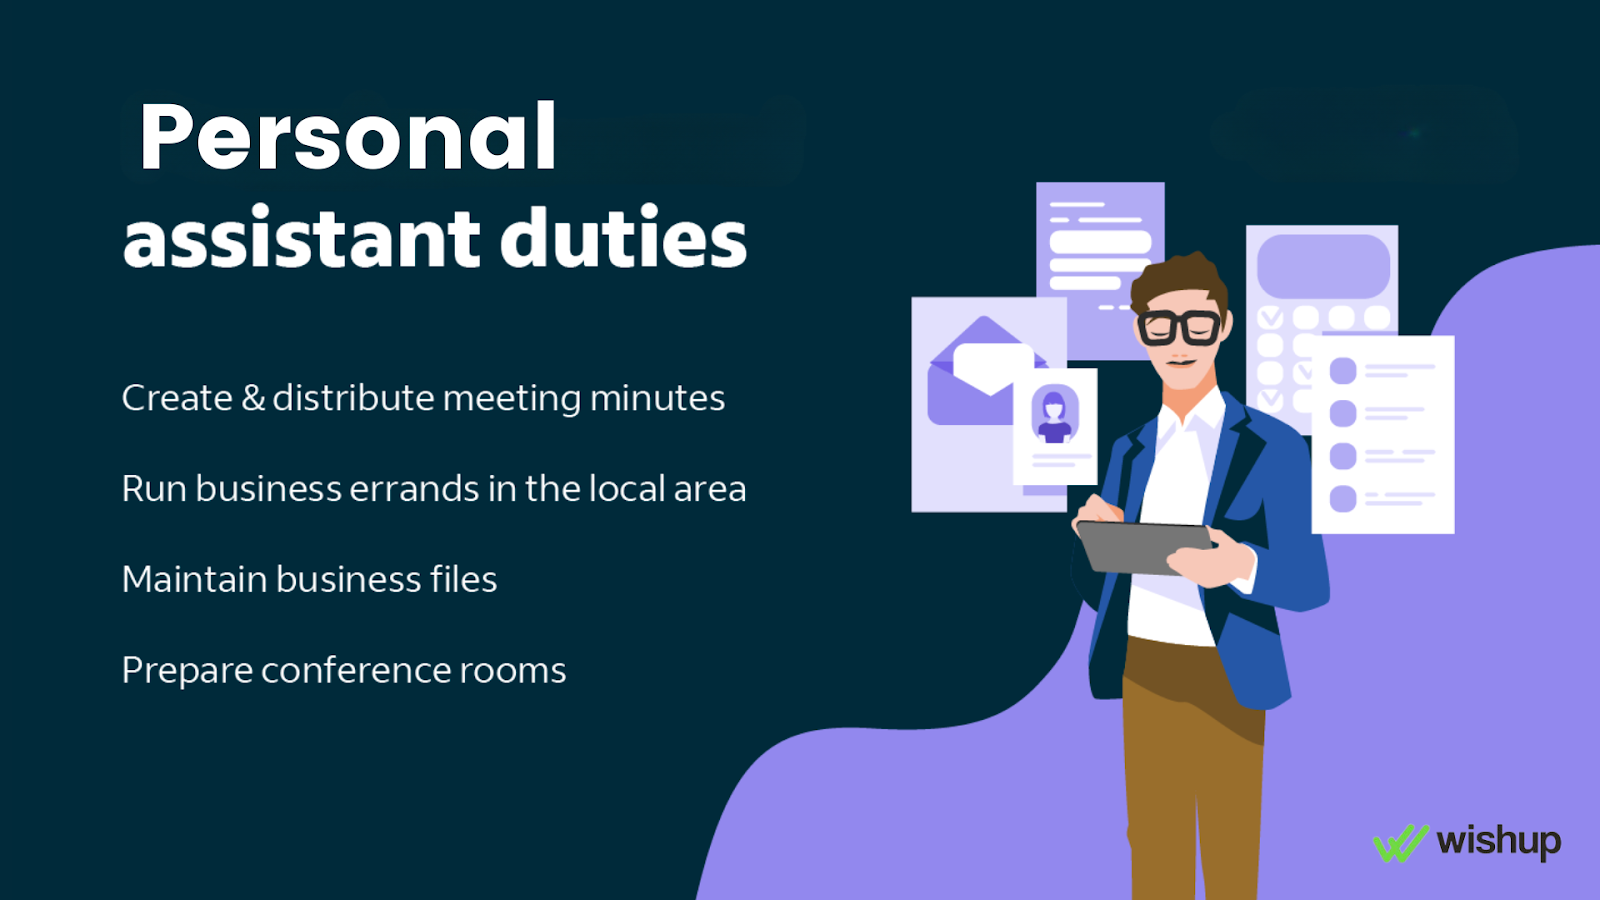 Know the duties and responsibilities of a personal assistant